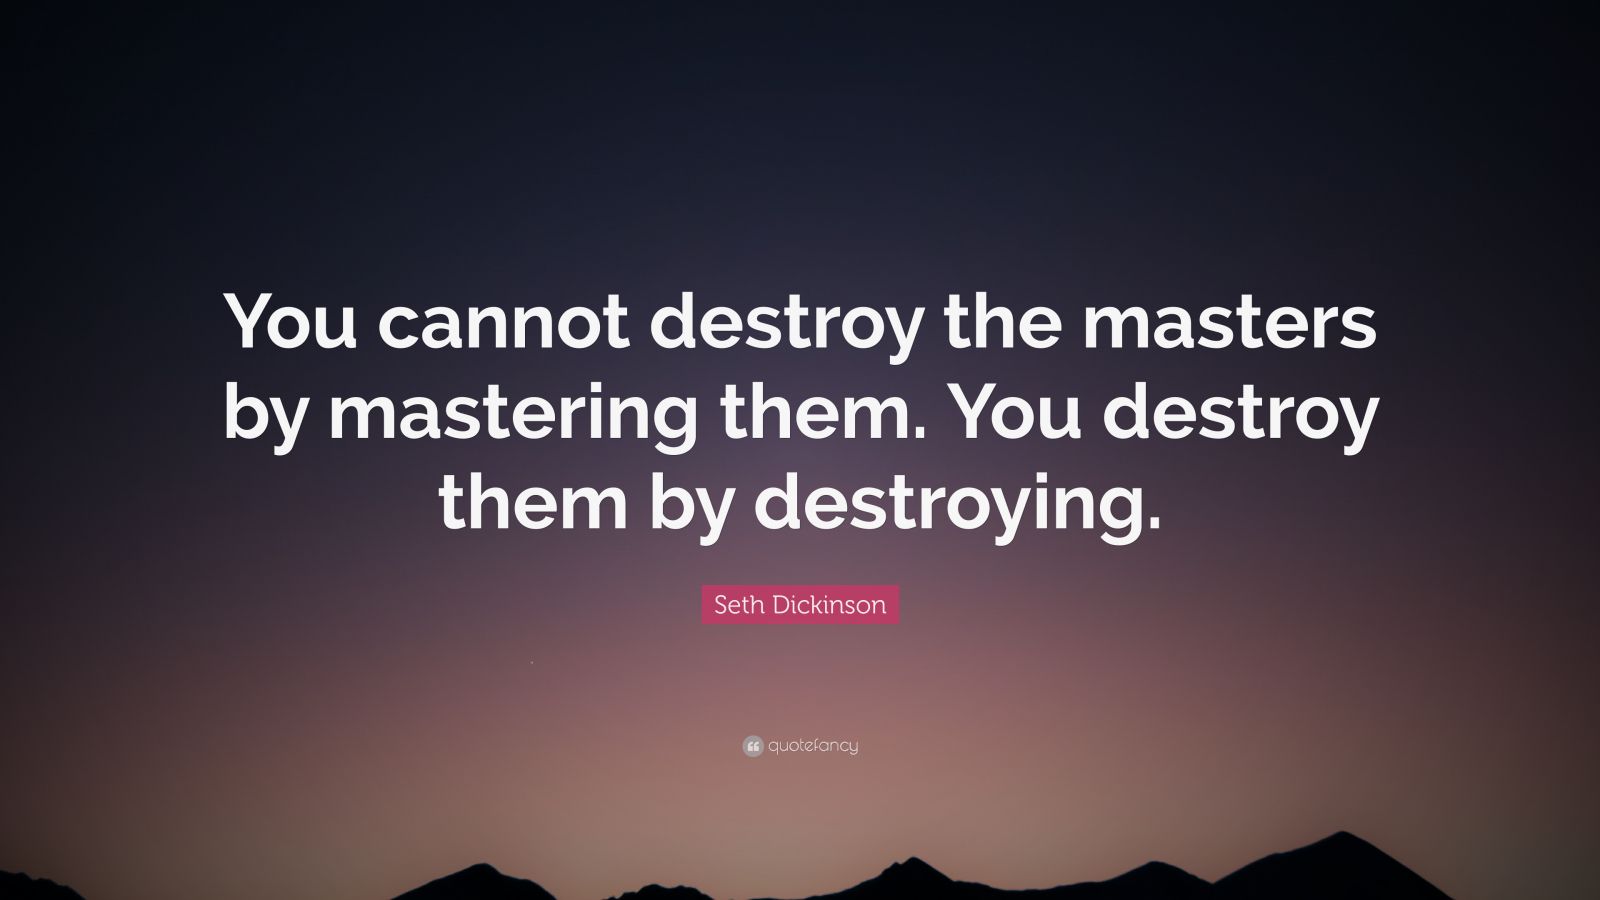 Destroy the masters